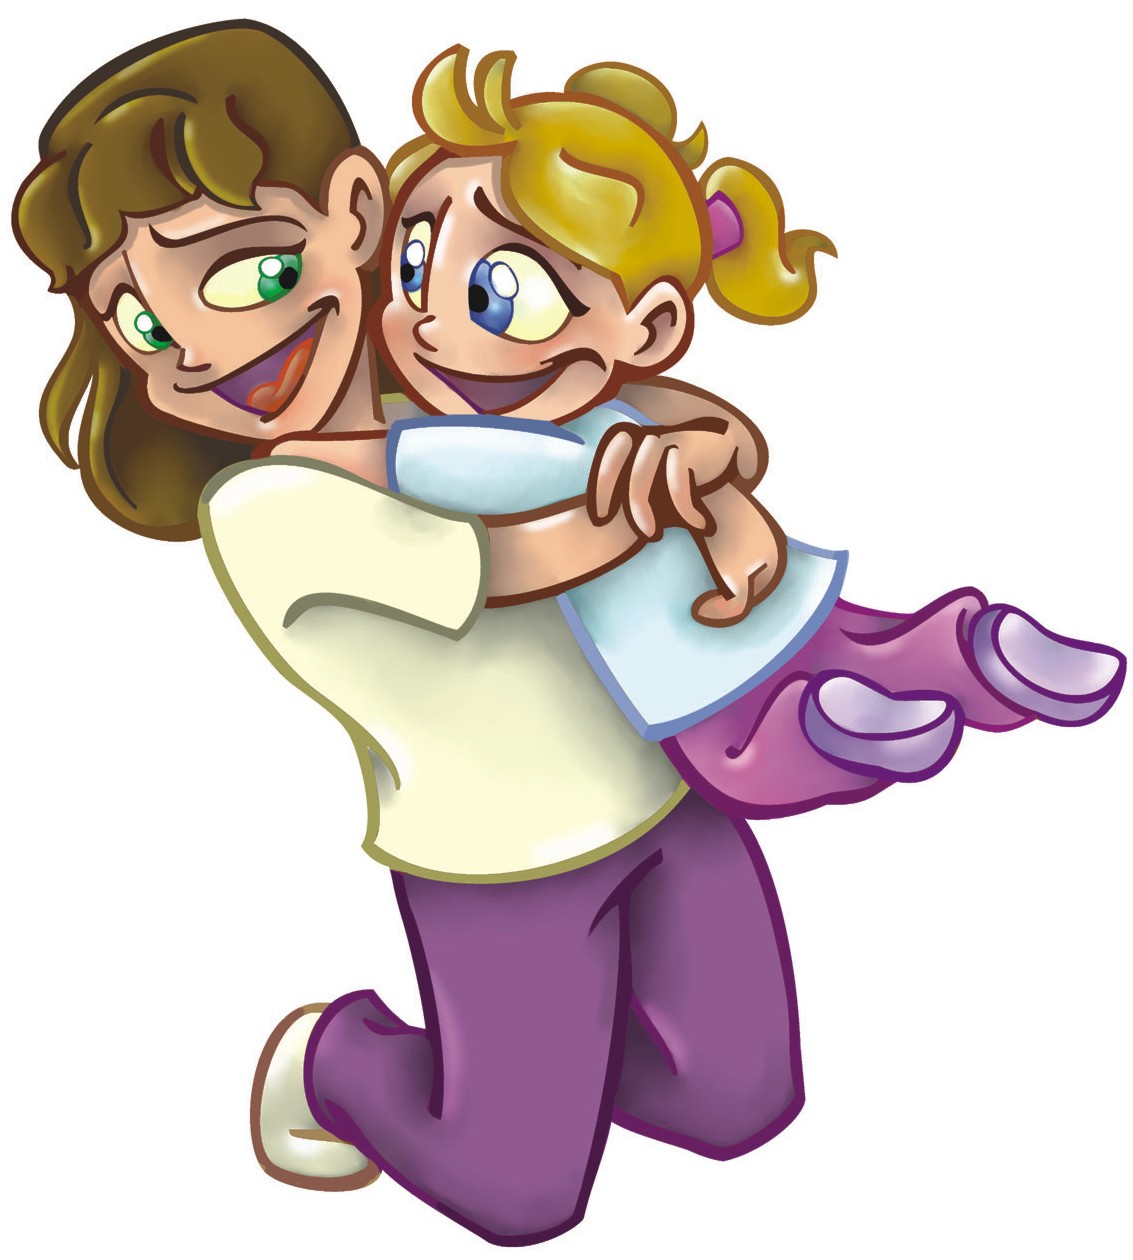 Friends Hugging Clipart   Clipart Panda   Free Clipart Images